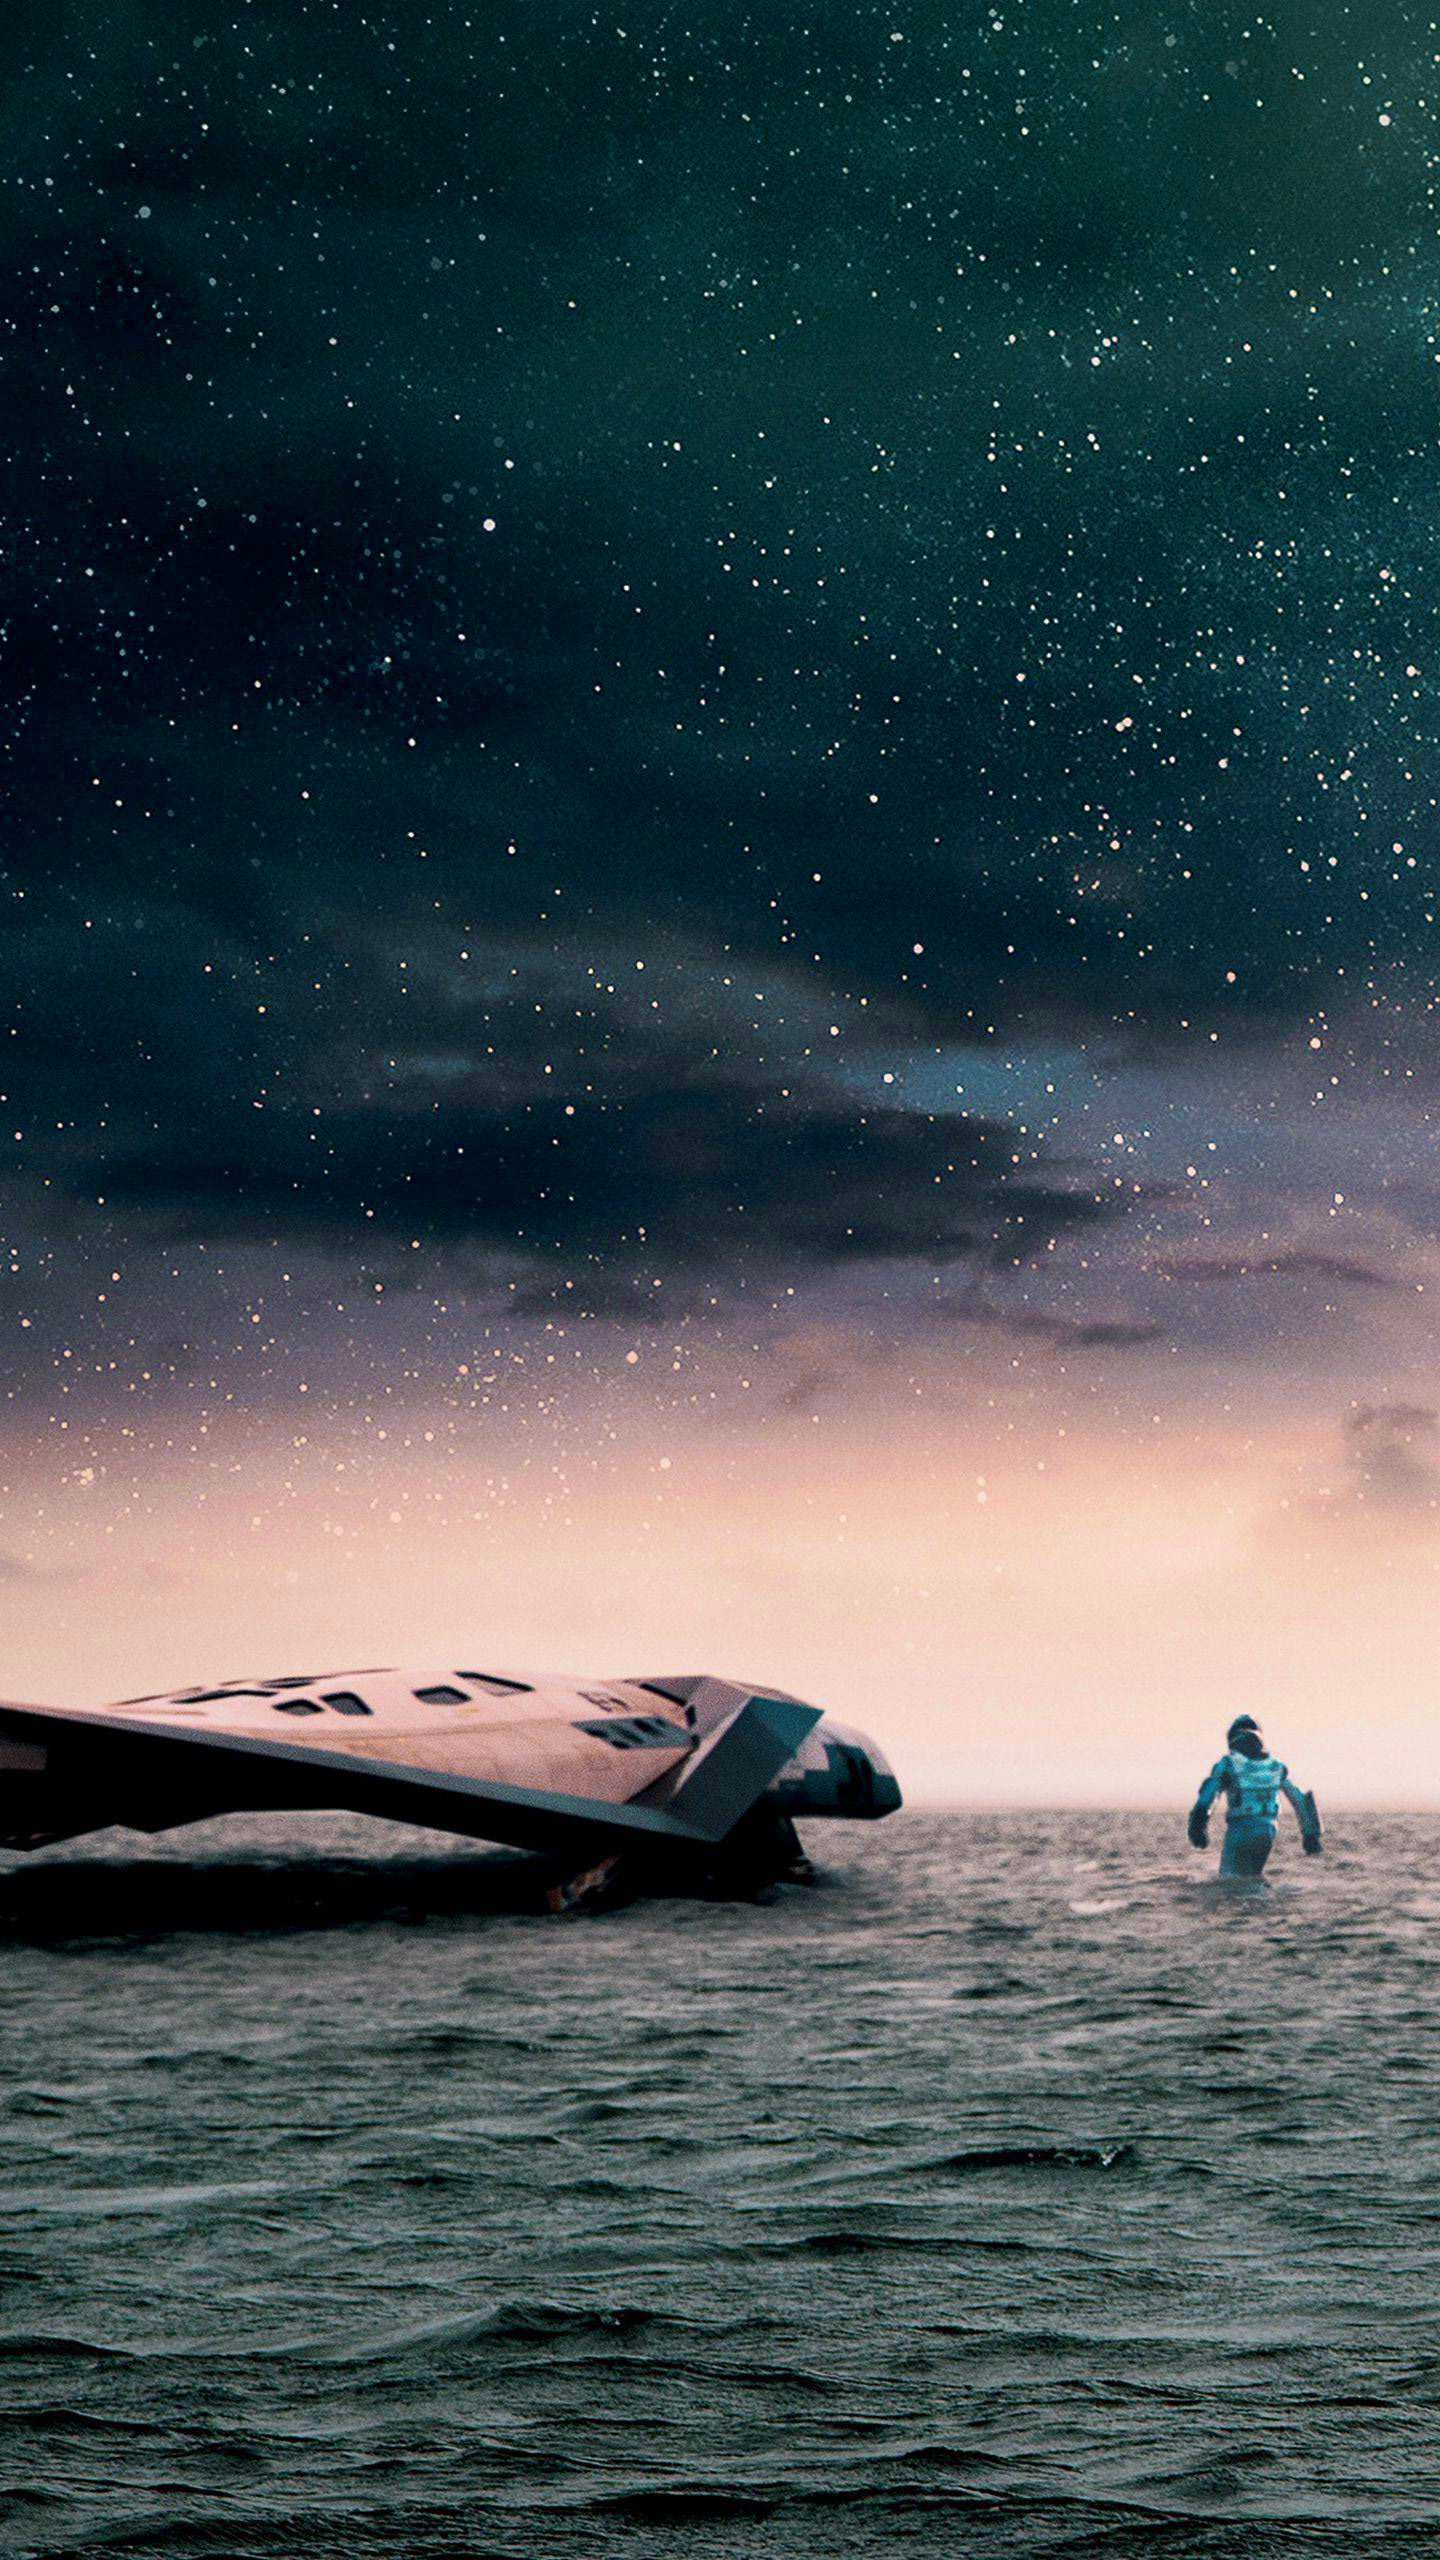 Interstellar: The story of a space team of pioneers, One of the best science-fiction films of all time. 1440x2560 HD Wallpaper.